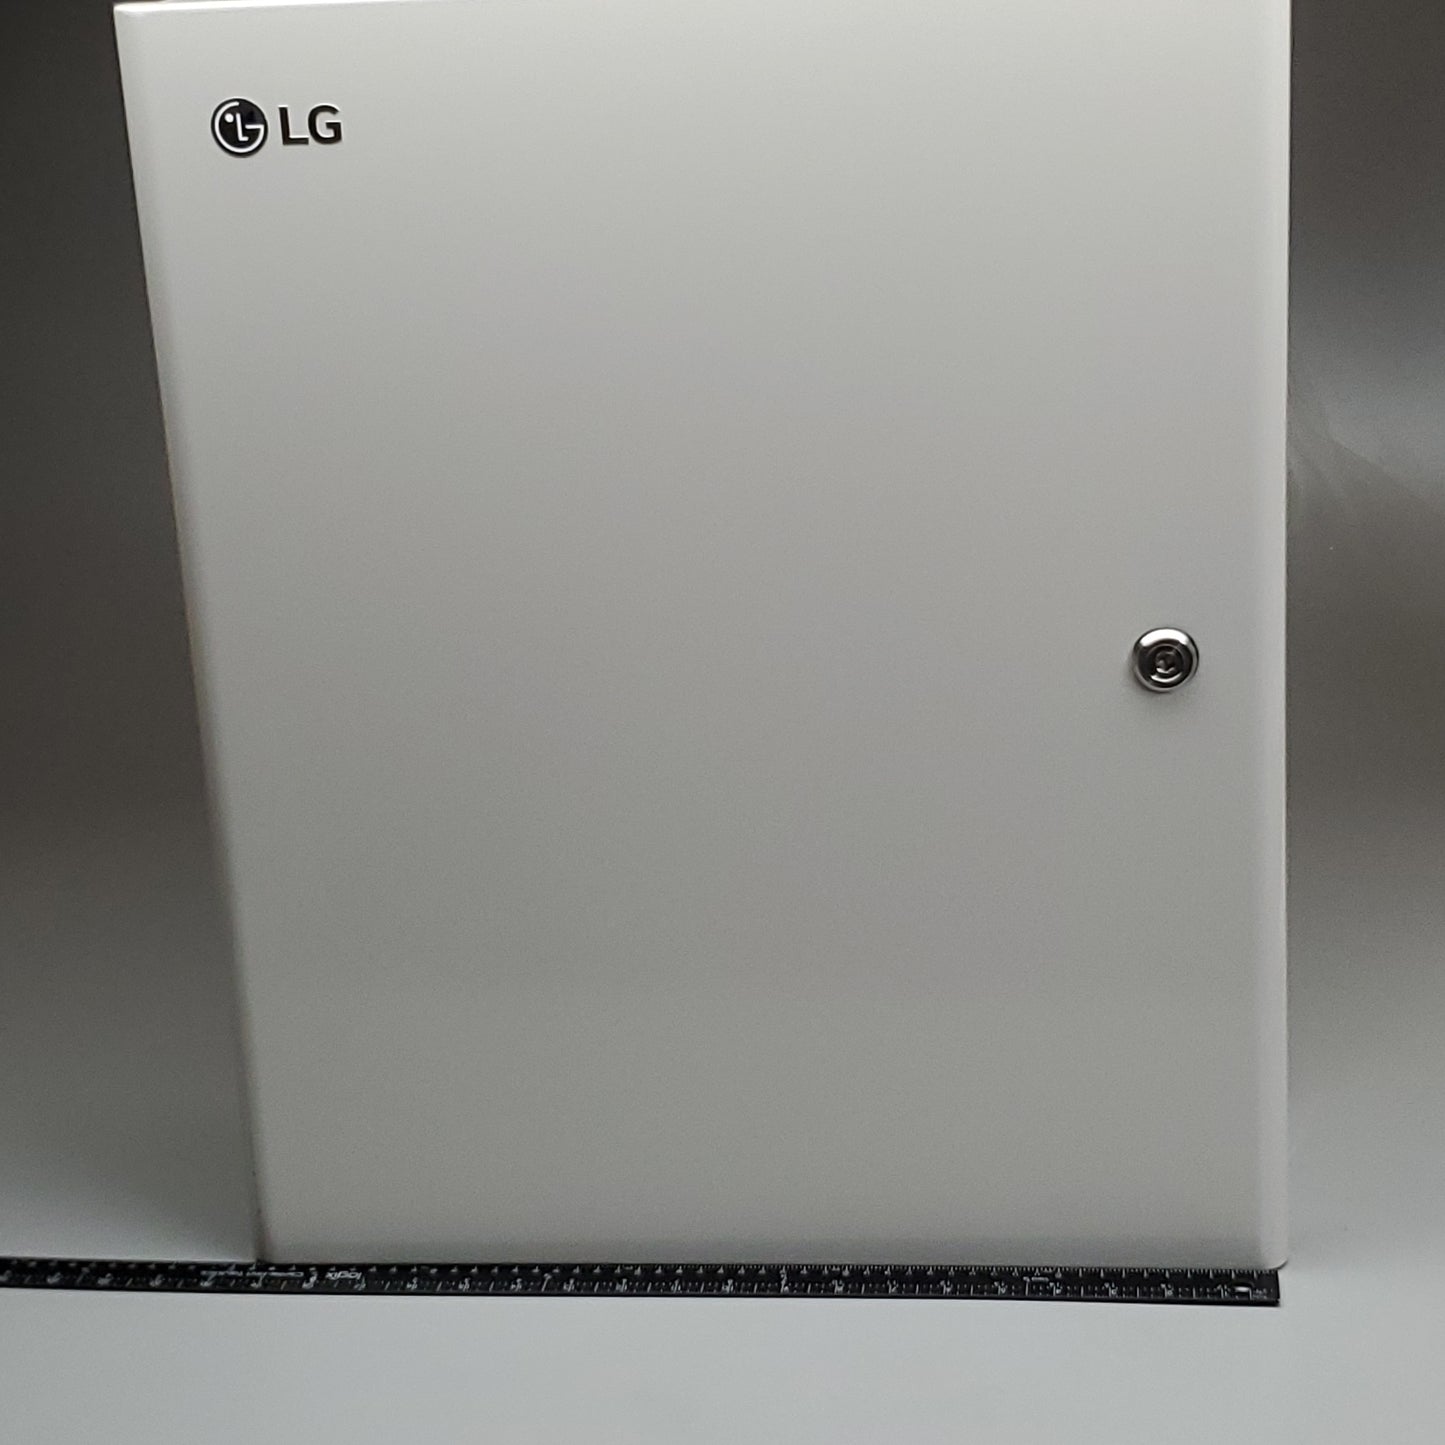 LG Electronics ESS Home 8 Storage System Battery & Smart Energy Box Demo Unit RBA008K0A00 (Pre-Owned)